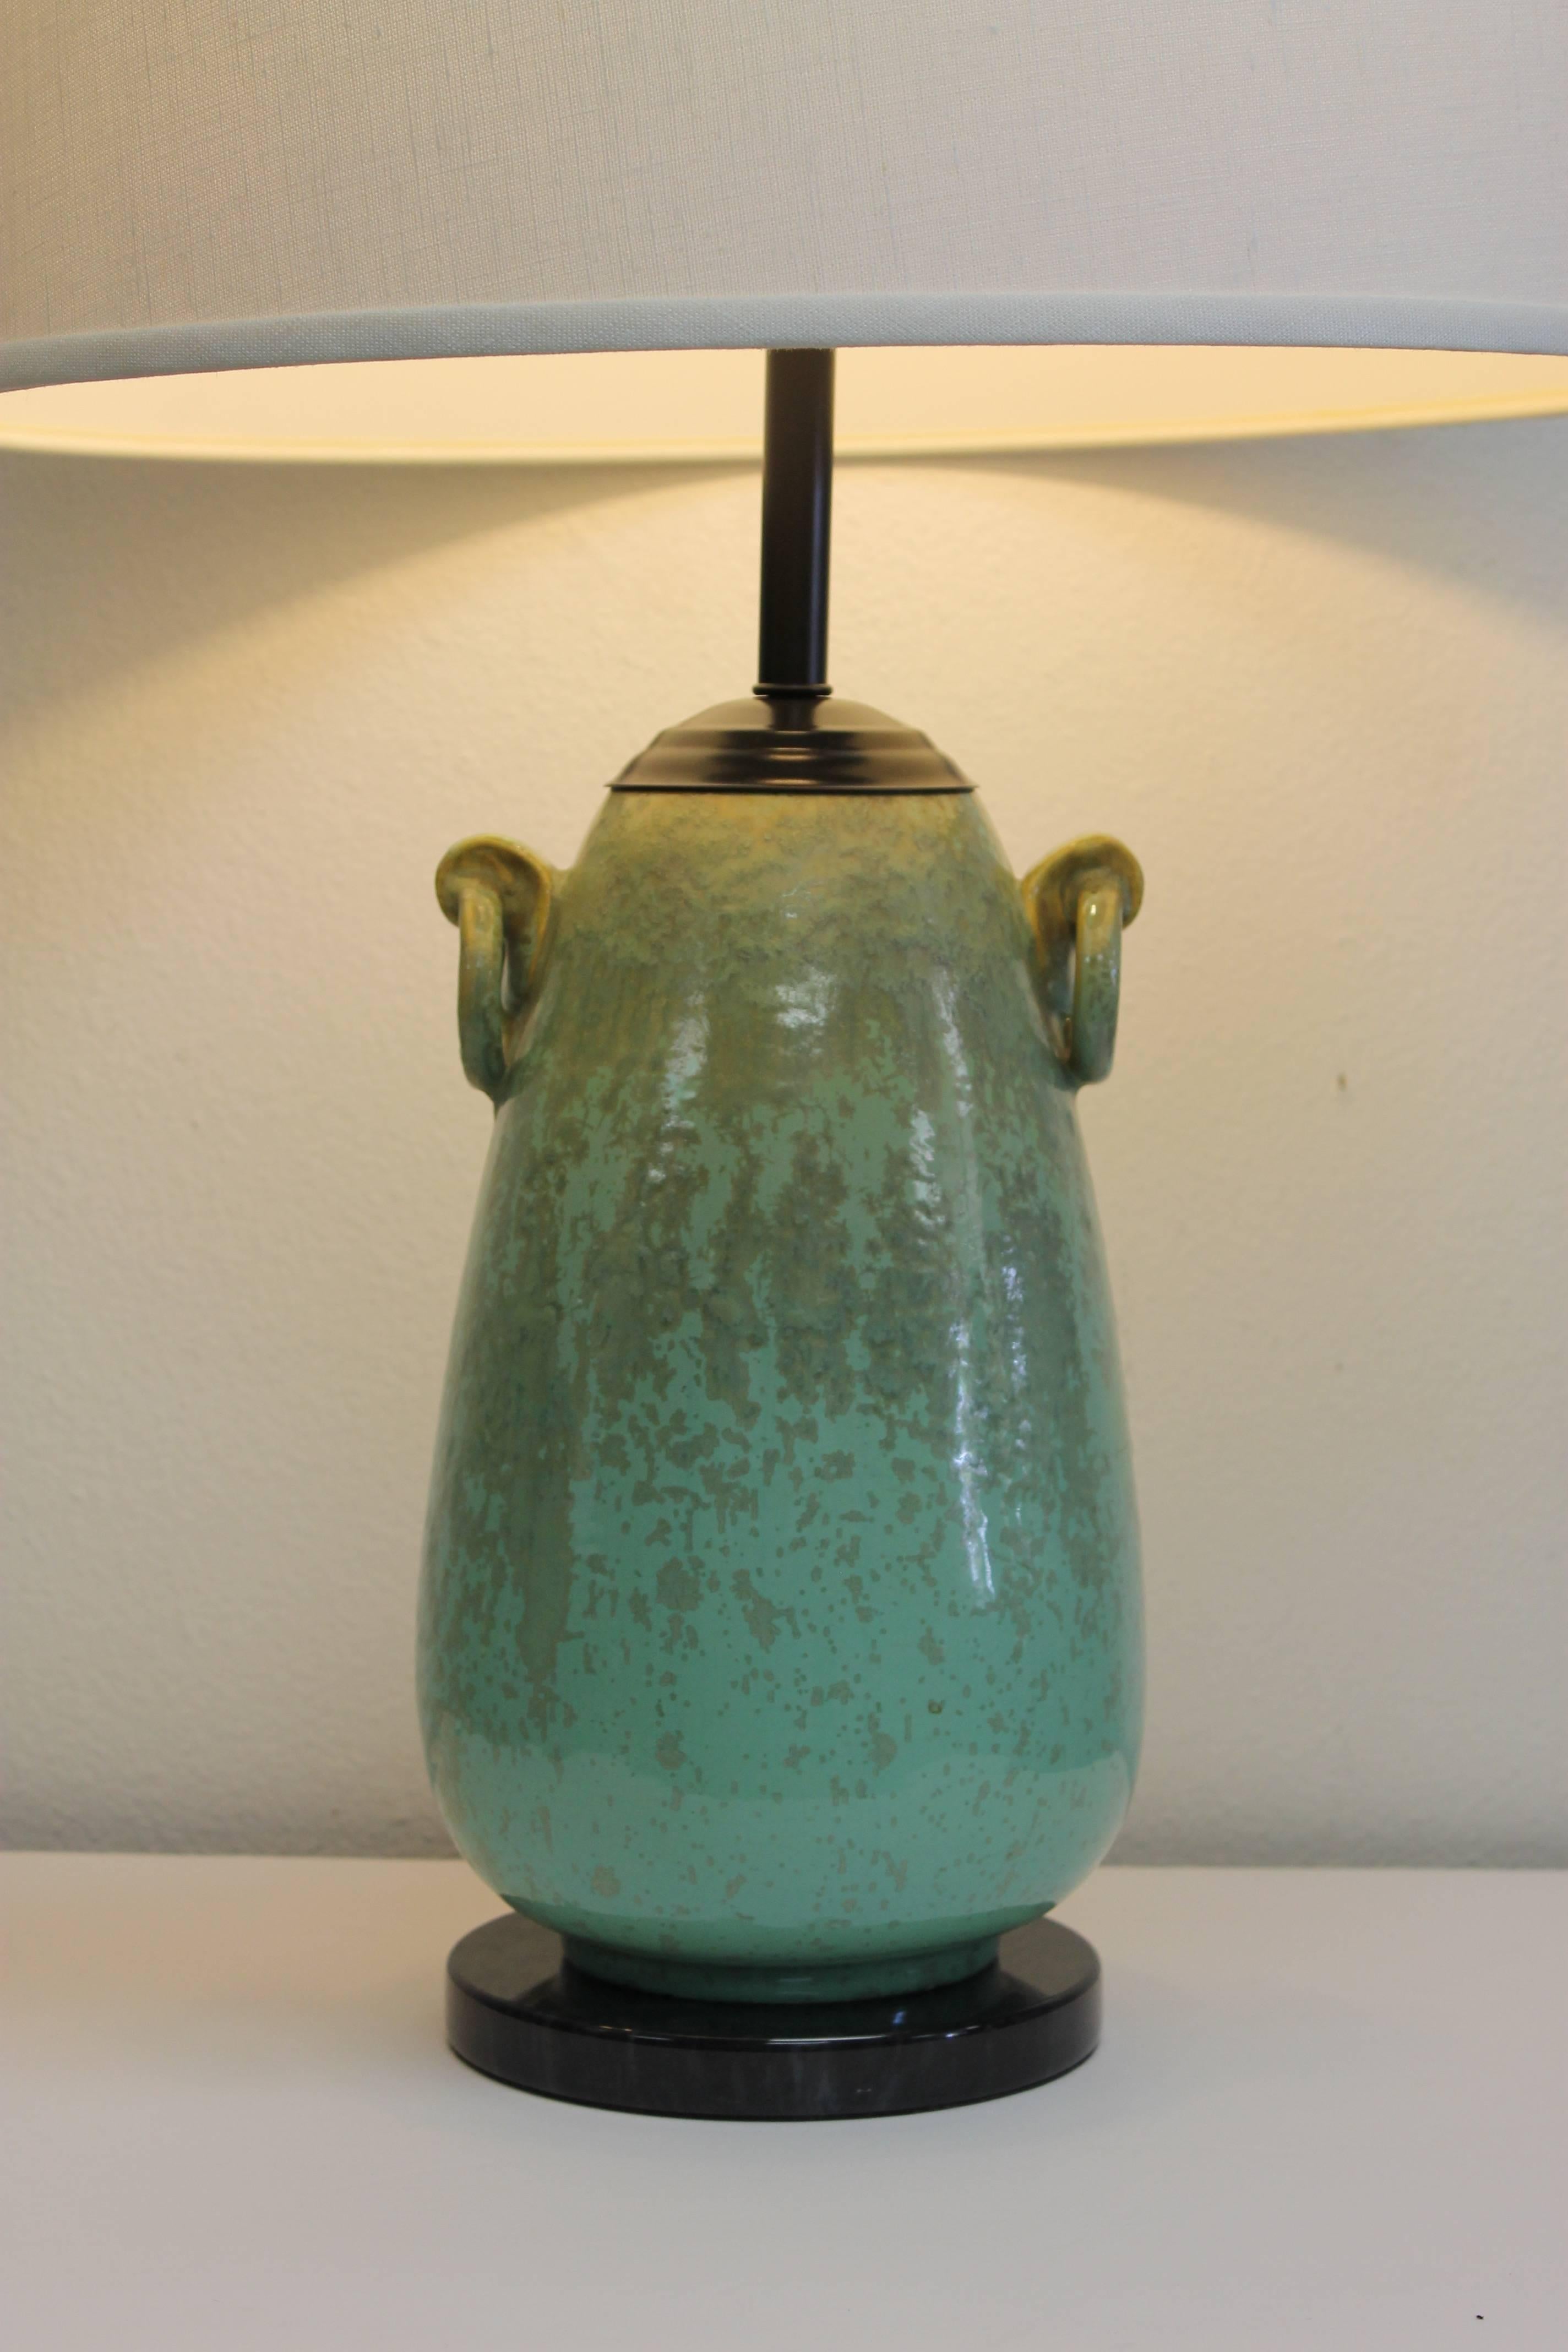 Sculptural table lamp by Fulper pottery consisting of two ring handles. Lamp has been updated by adding a marble base and black hardware. Beautiful green run glaze throughout. Base is 7" diameter. Vase is 13" high and 8" diameter.